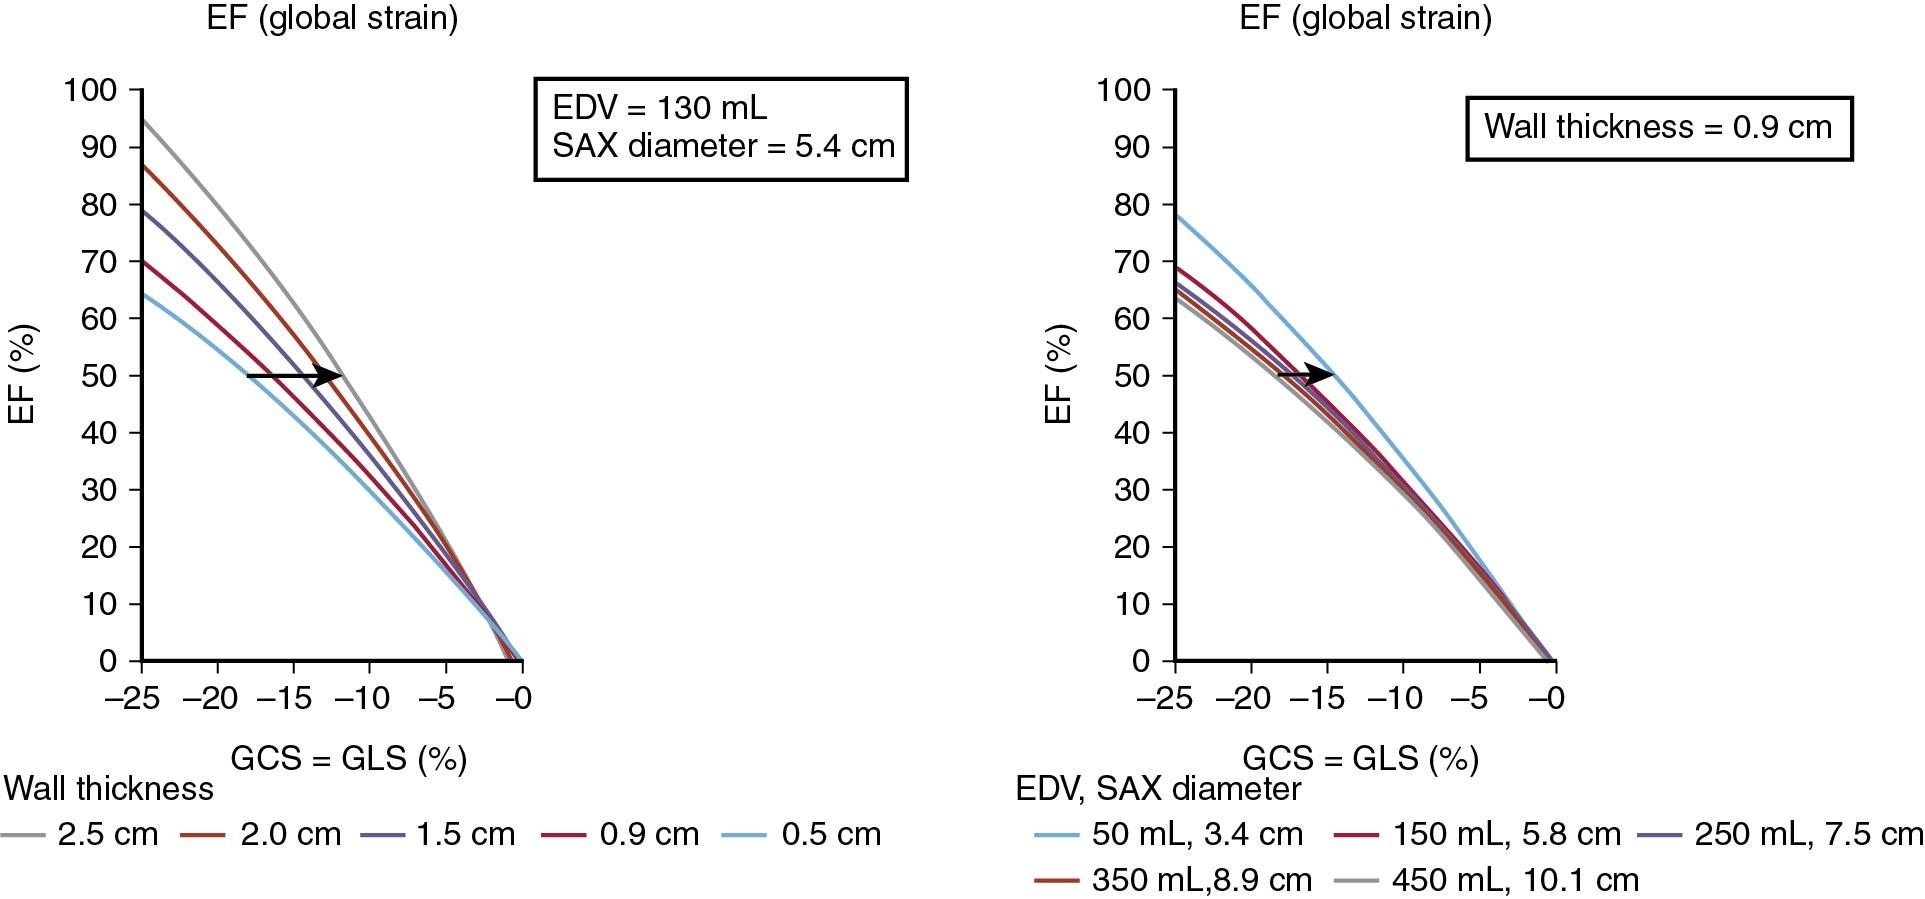 Fig. 7.3, Relationship of ejection fraction (EF) to left ventricular (LV) global circumferential (GCS) and longitudinal (GLS) strain. ( A ) In an analytic model specified by Equation 1, GLS contributes half as much to LVEF as GCS. In pressure overload, with the left ventricle having thicker walls, less GLS and GCS is required to maintain LVEF. ( B ) In volume overload, with the left ventricle having a larger volume and smaller relative wall thickness, more GLS and GCS are required to maintain LVEF (C). EDV, End-diastolic volume.